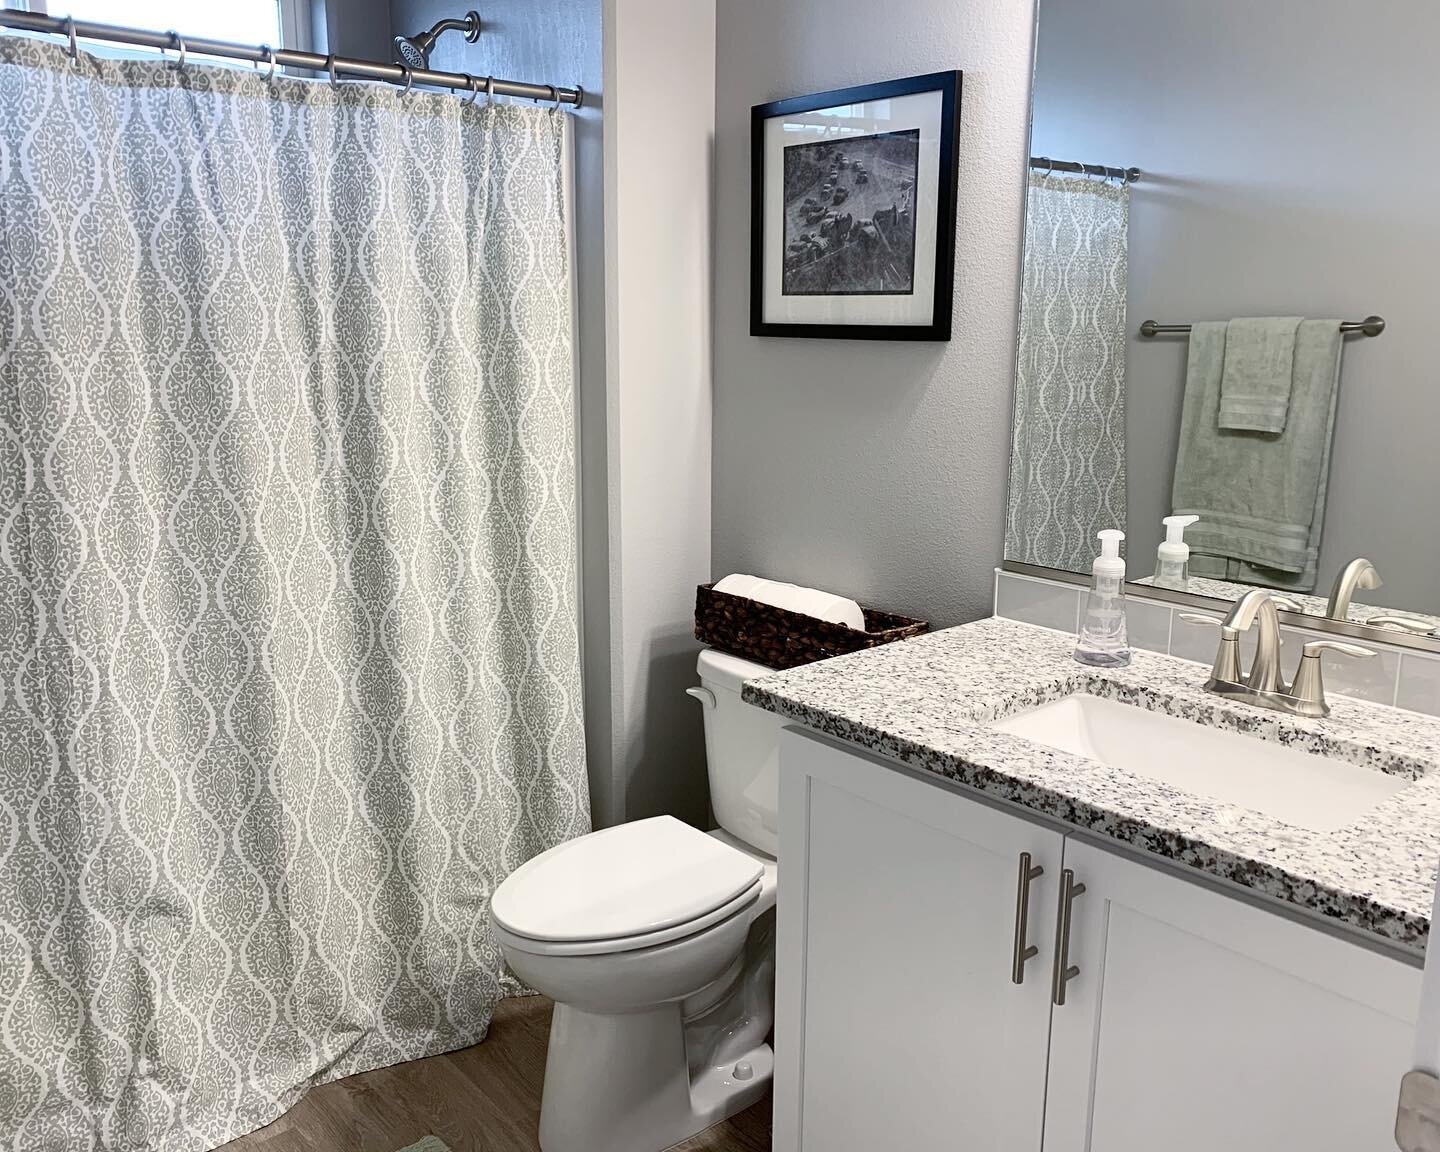 Keeping it simple. Simply clean. 🧹🏠✨ Who else loves that feeling of coming into a freshly cleaned bathroom? 👋